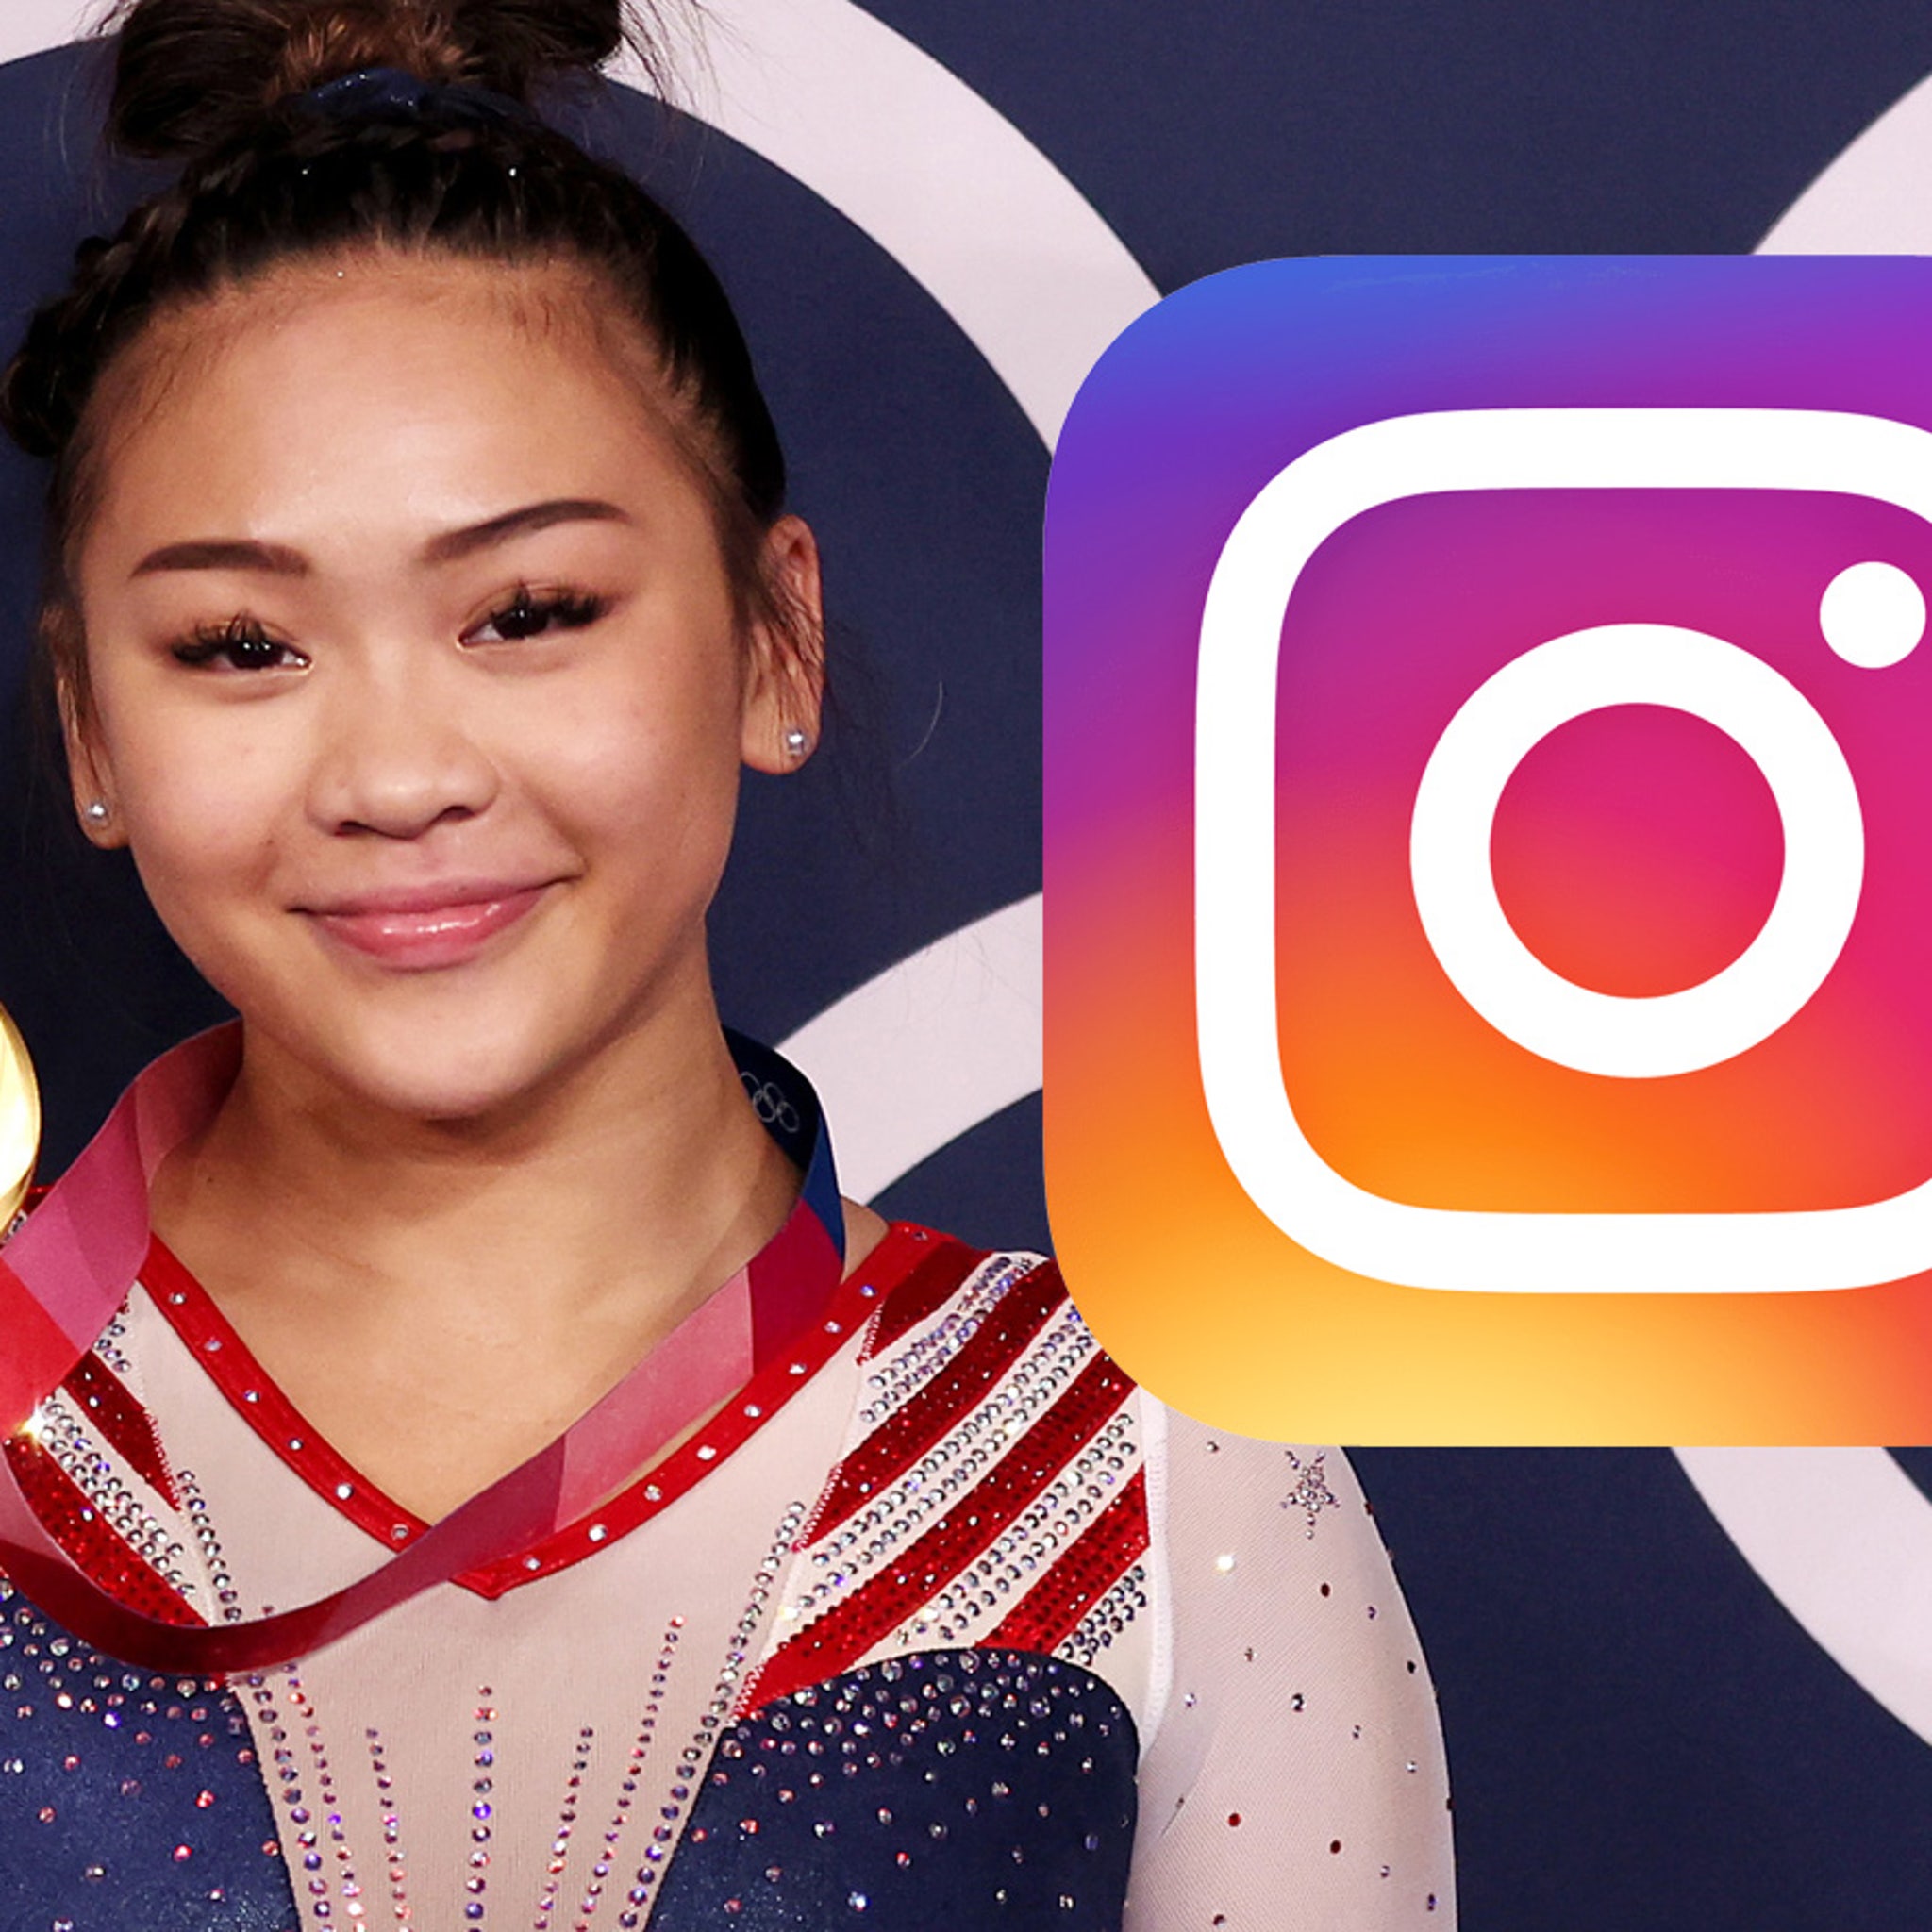 Suni Lee Passes 1 Mil. Instagram Followers After Gold Medal, Could Make  Millions!